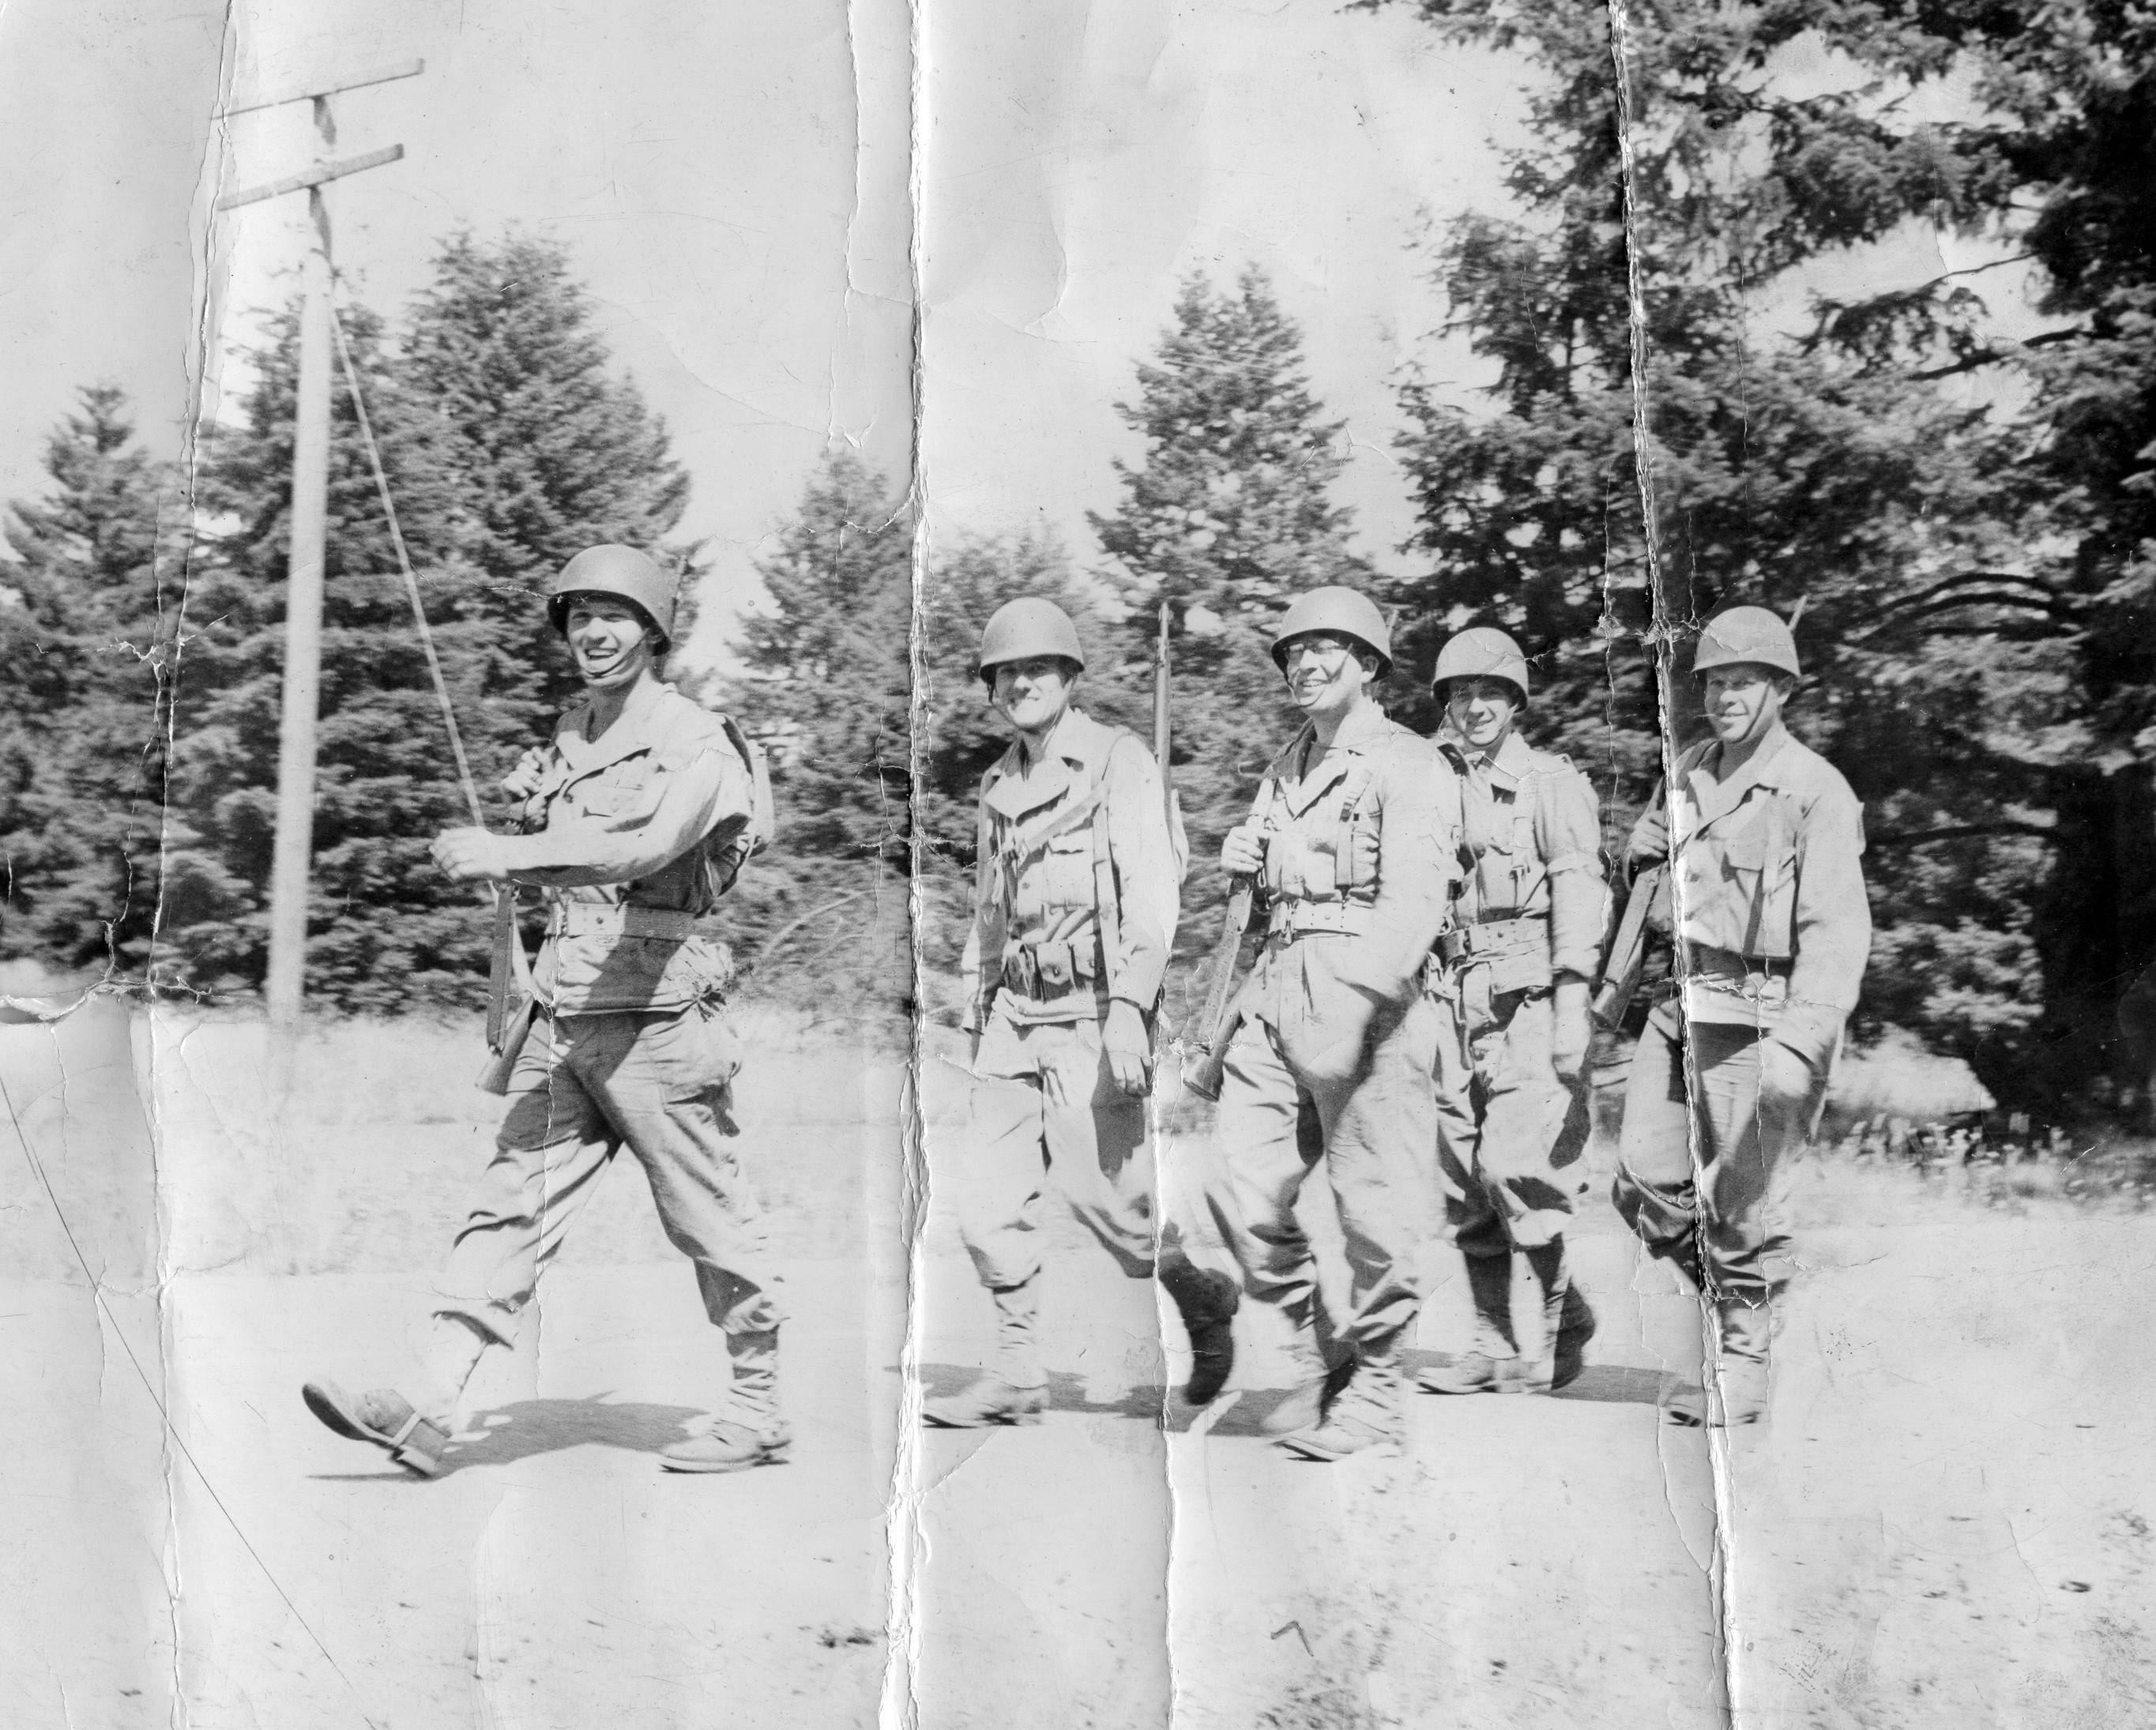 Summer 1944 at Fort Lewis - Johnny leads the way!